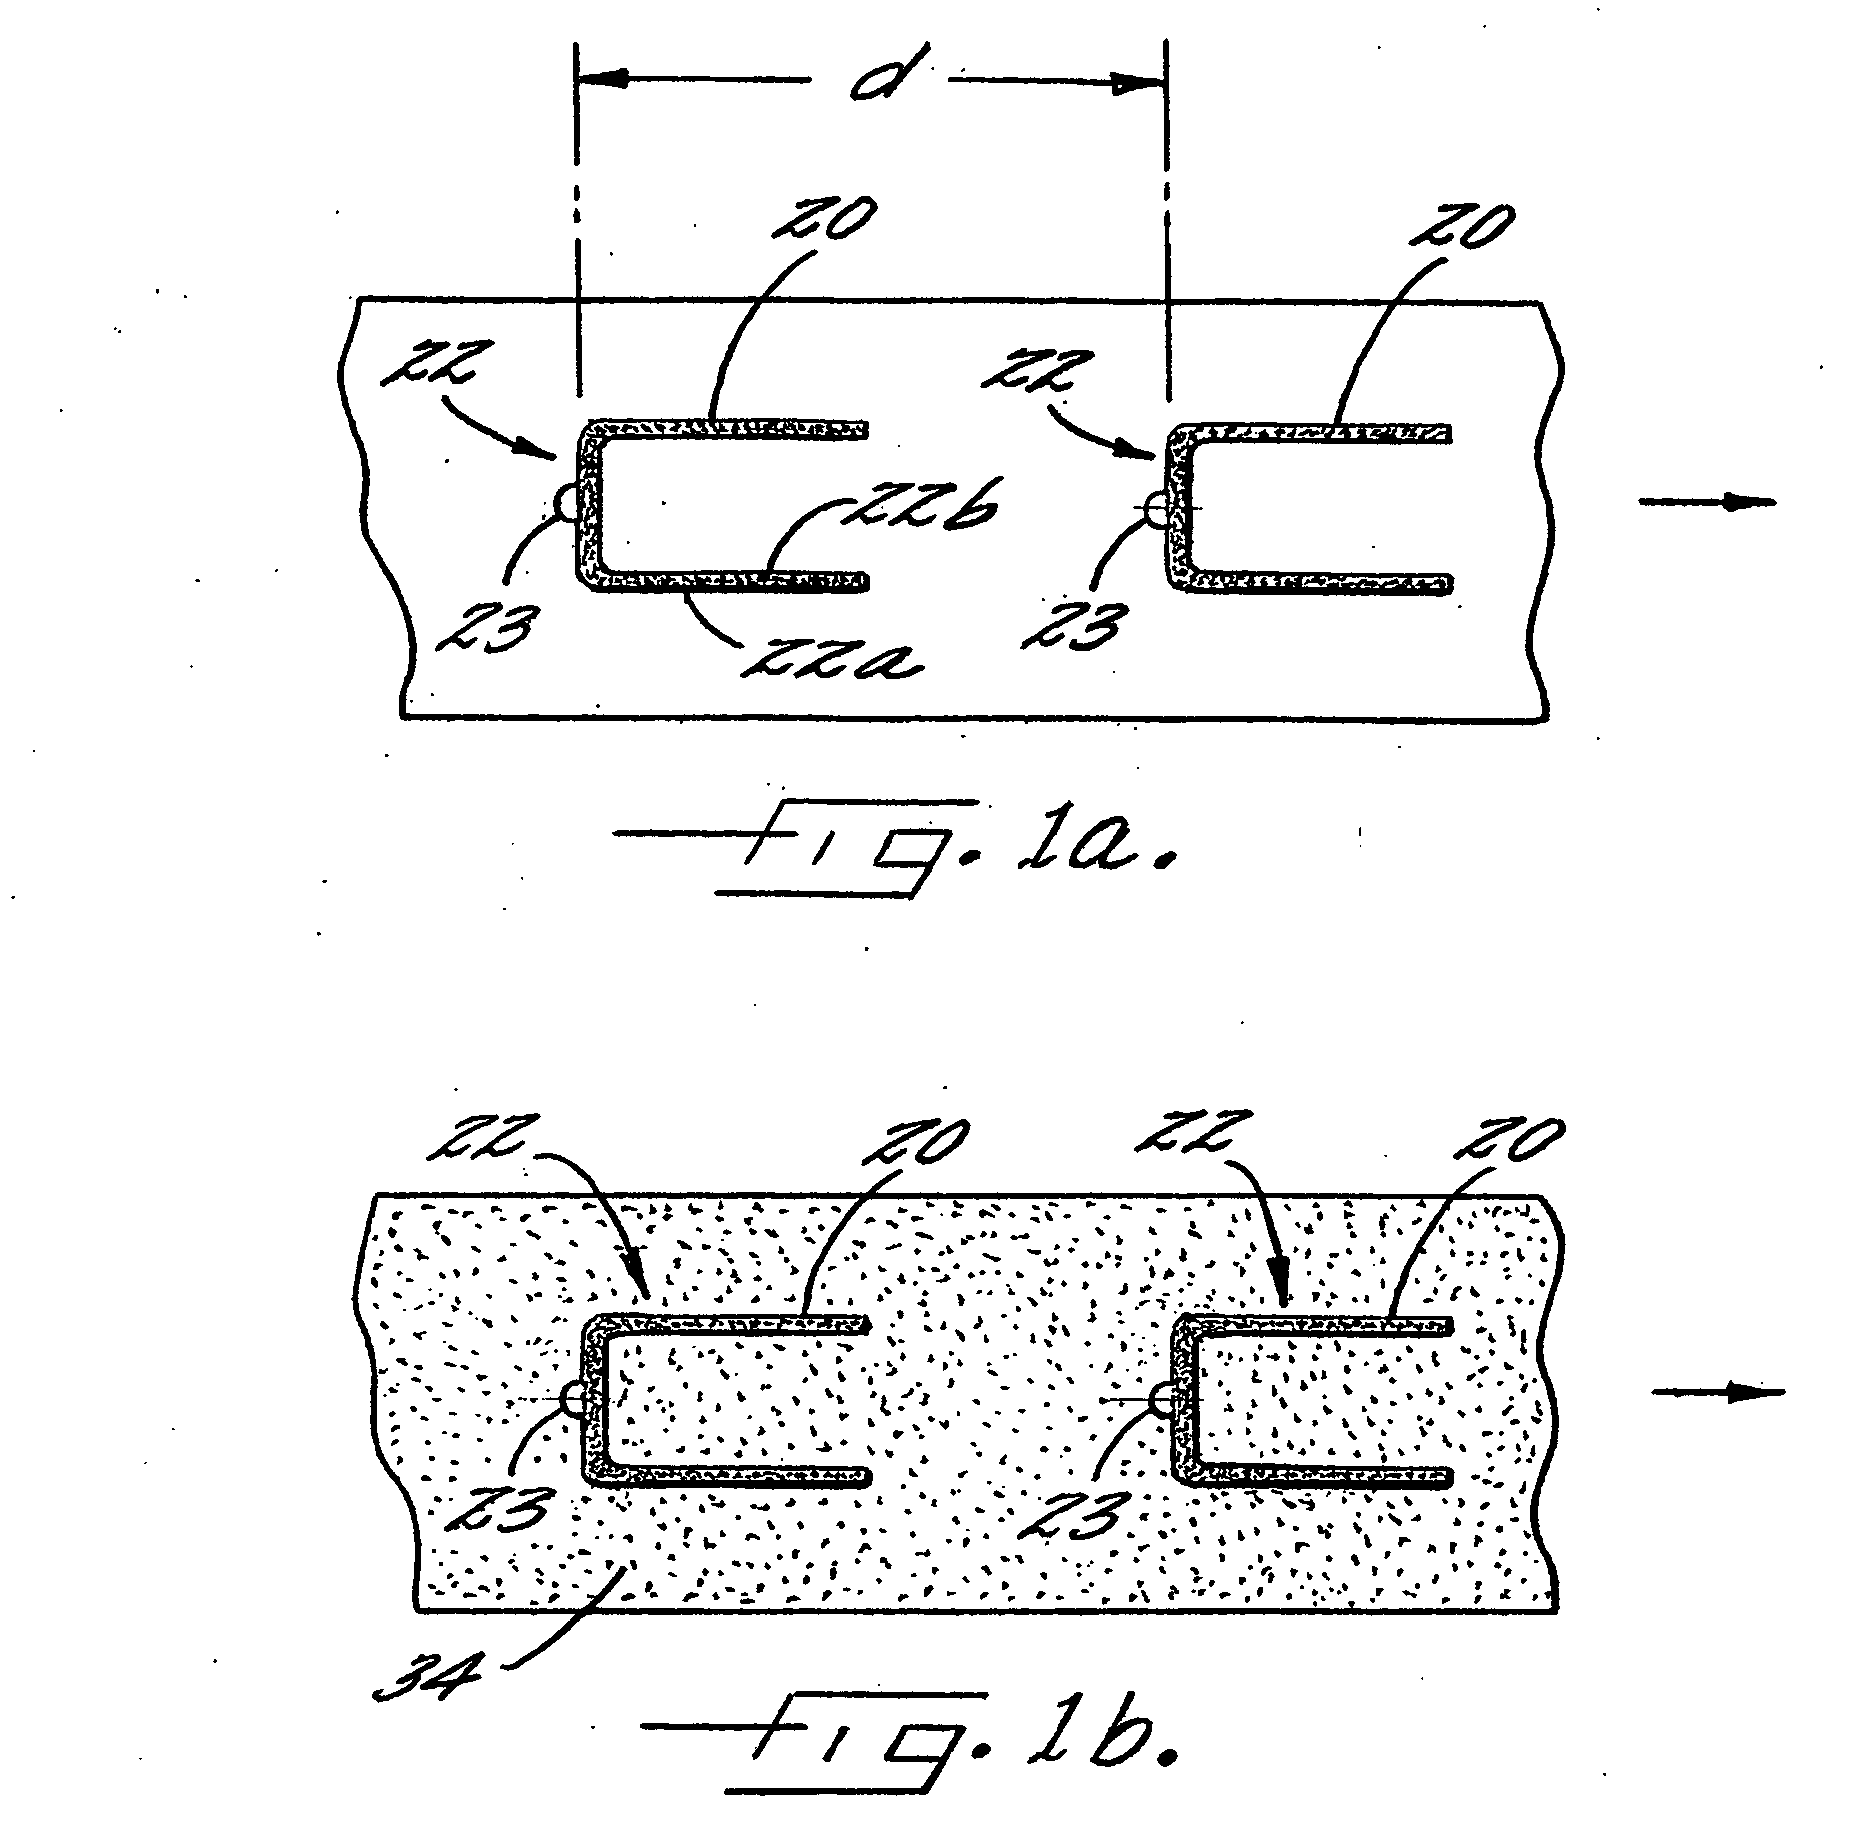 Flexible packaging structure with a built-in opening and reclose feature, and method for making same